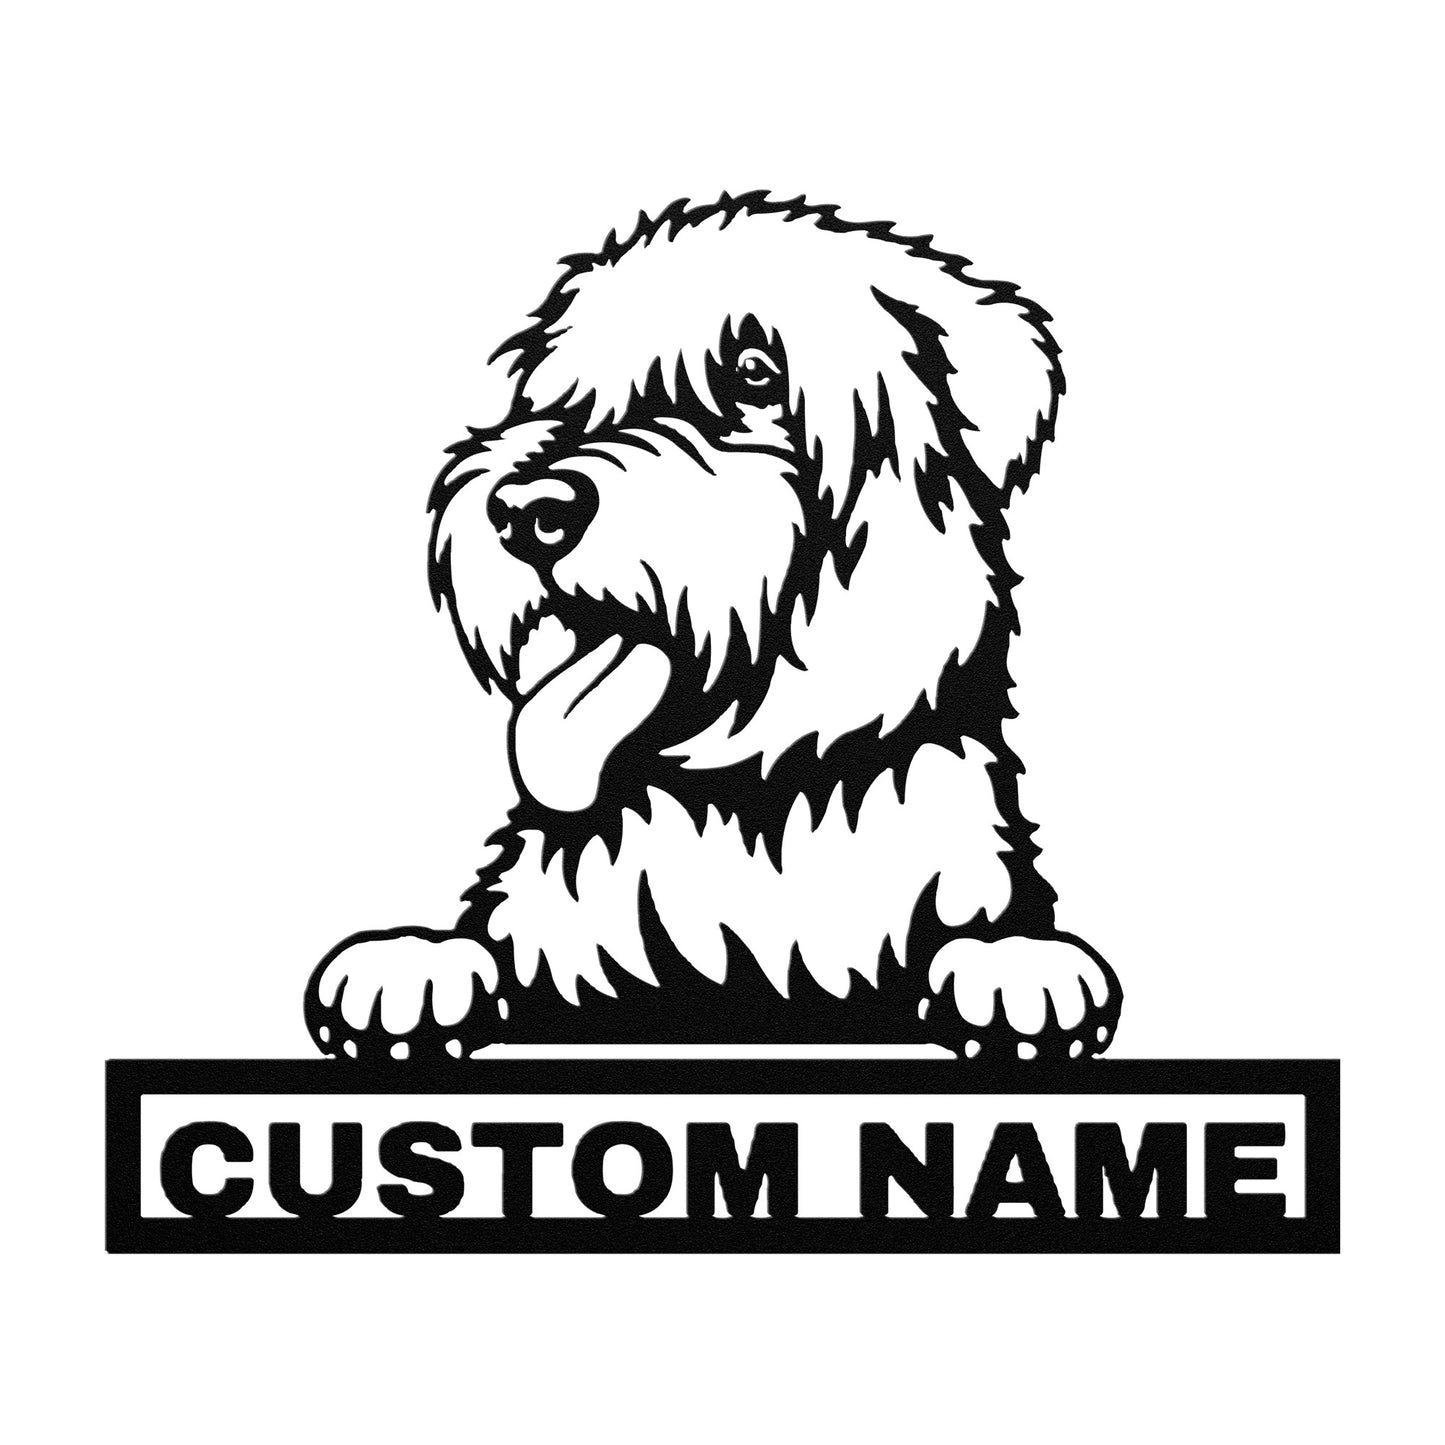 Personalized Wheaten Terrier Dog Metal Sign - Wheaten Terrier Custom Name Wall Decor, Metal Signs Customized Outdoor Indoor, Wall Art Gift For Wheaten Terrier Dog Lover